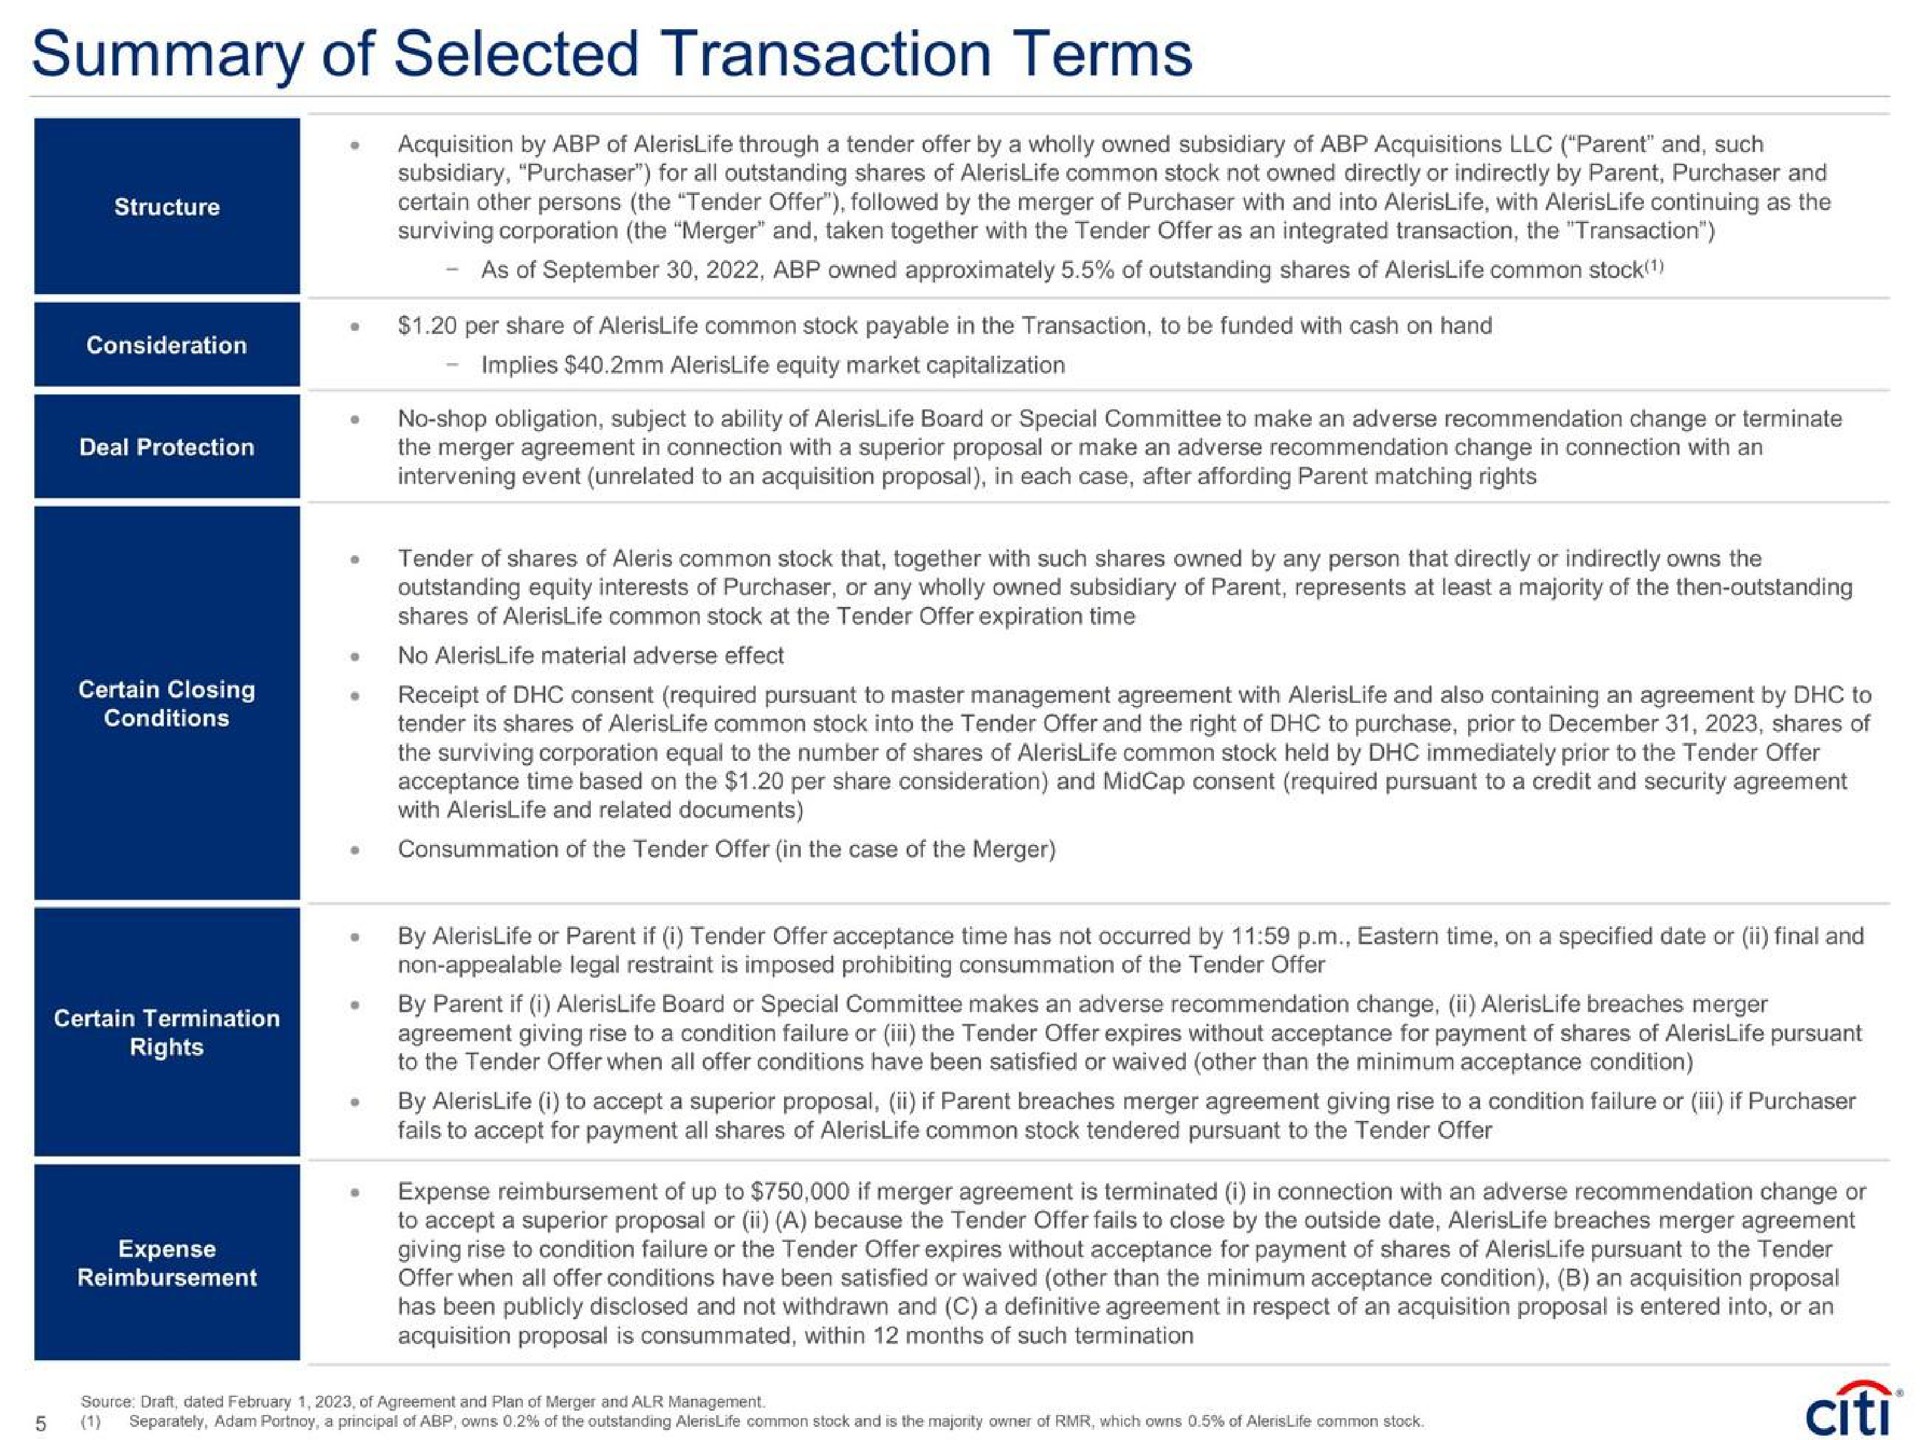 summary of selected transaction terms rights | Citi